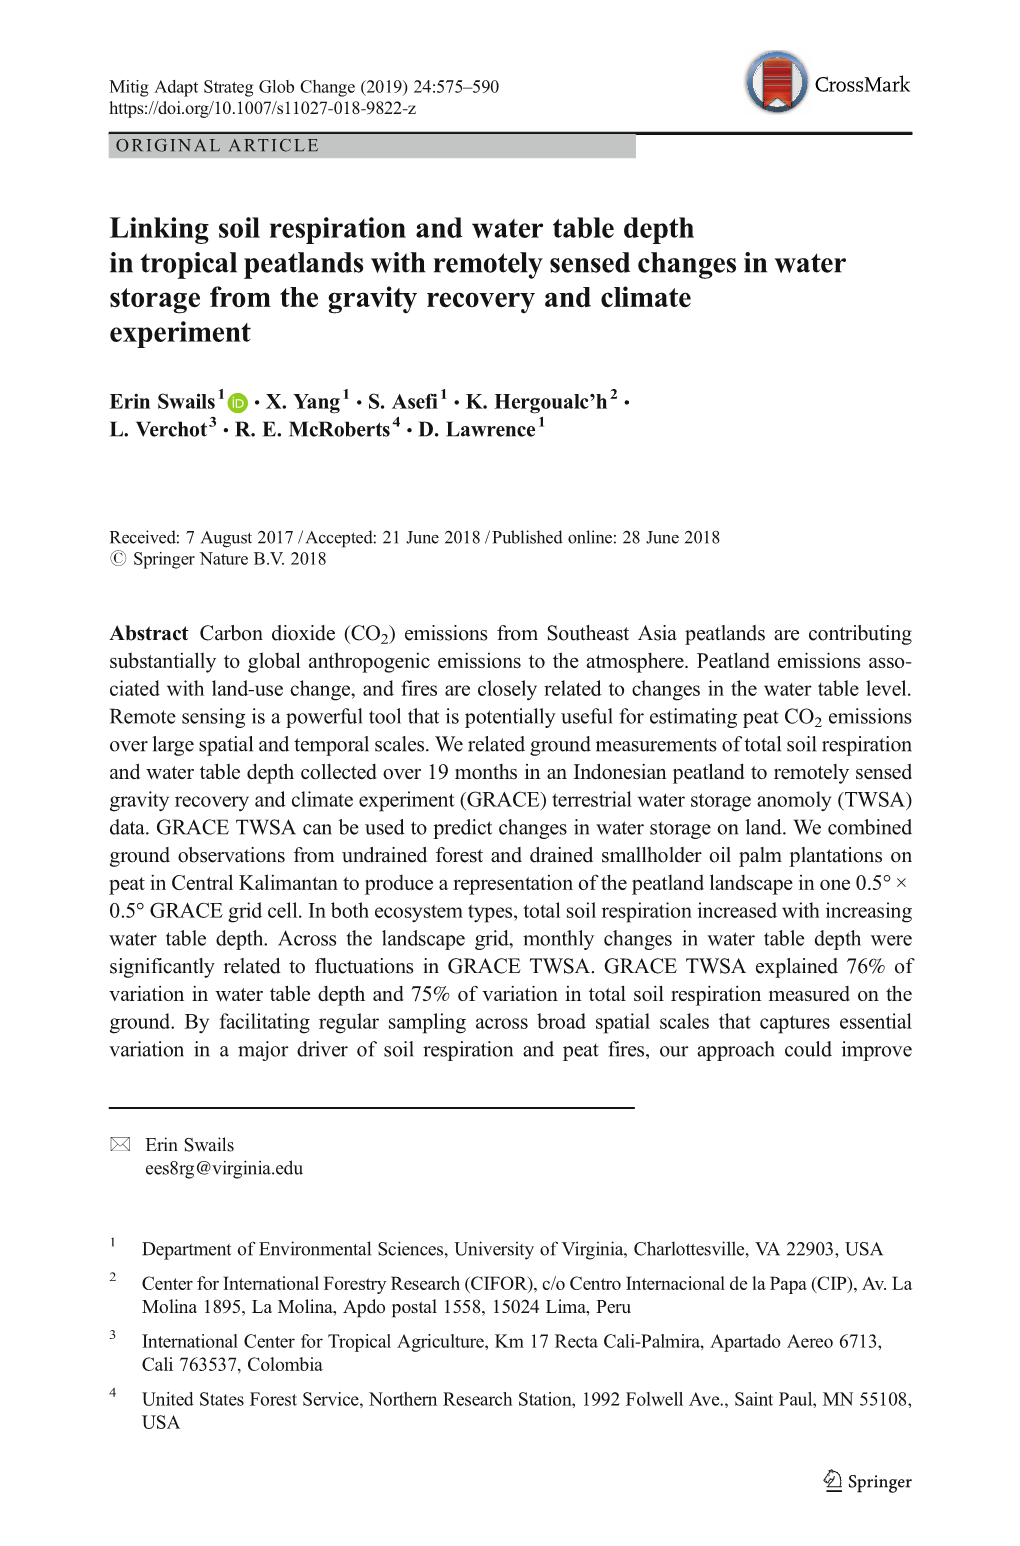 Linking Soil Respiration and Water Table Depth in Tropical Peatlands with Remotely Sensed Changes in Water Storage from the Gravity Recovery and Climate Experiment